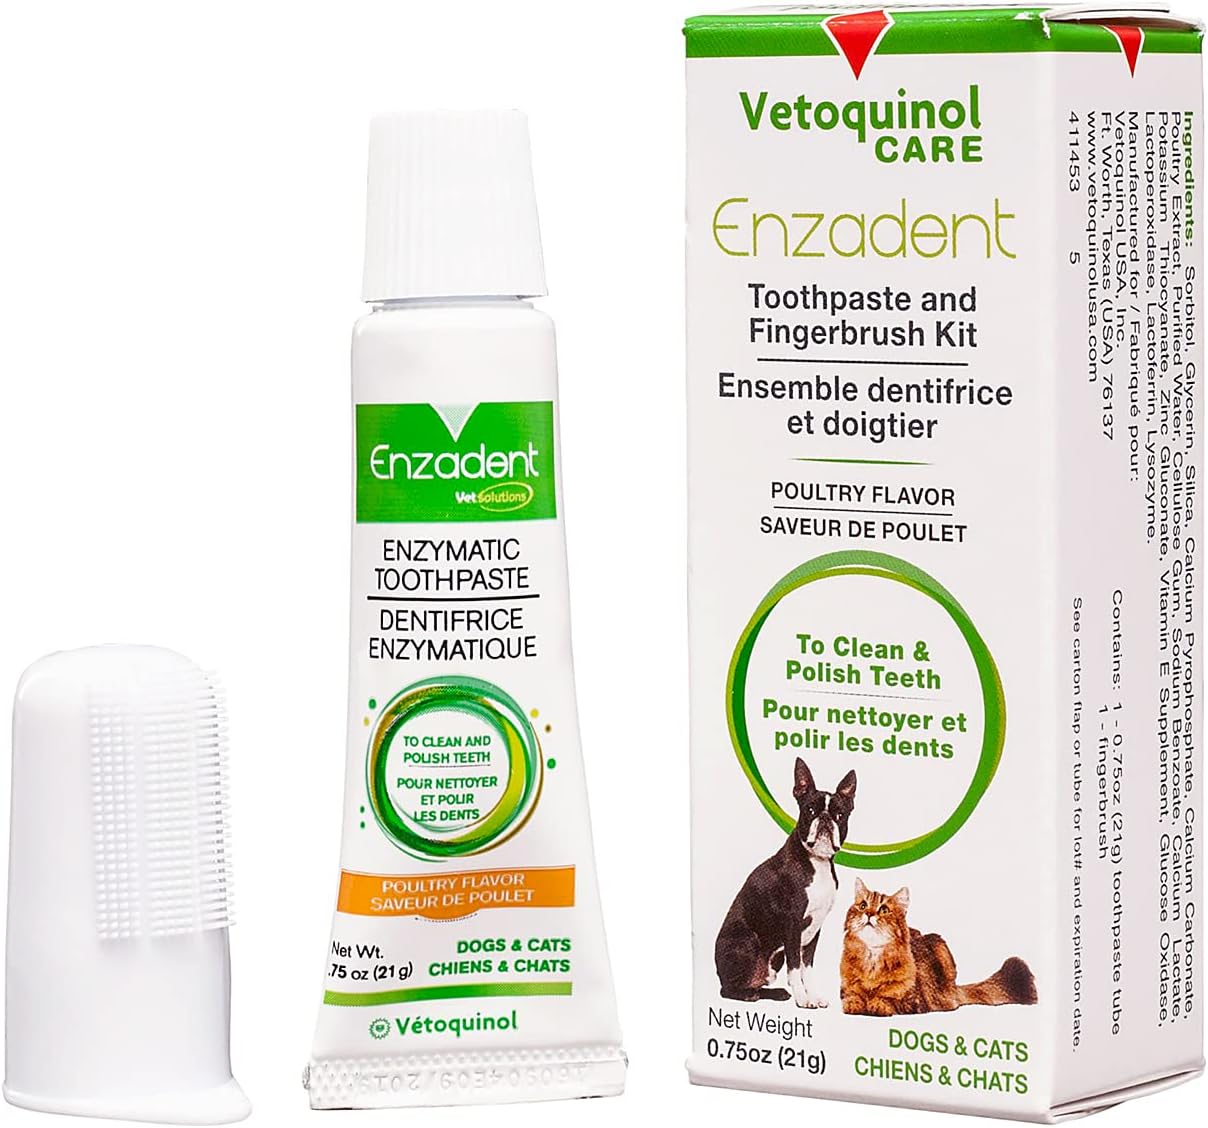 Vetoquinol Enzadent Enzymatic Toothpaste Kit + Fingerbrush for Cats & Dogs – .75oz, Poultry Flavor – Oral Dental Care Kit: Removes Plaque, Polishes Teeth & Freshens Breath